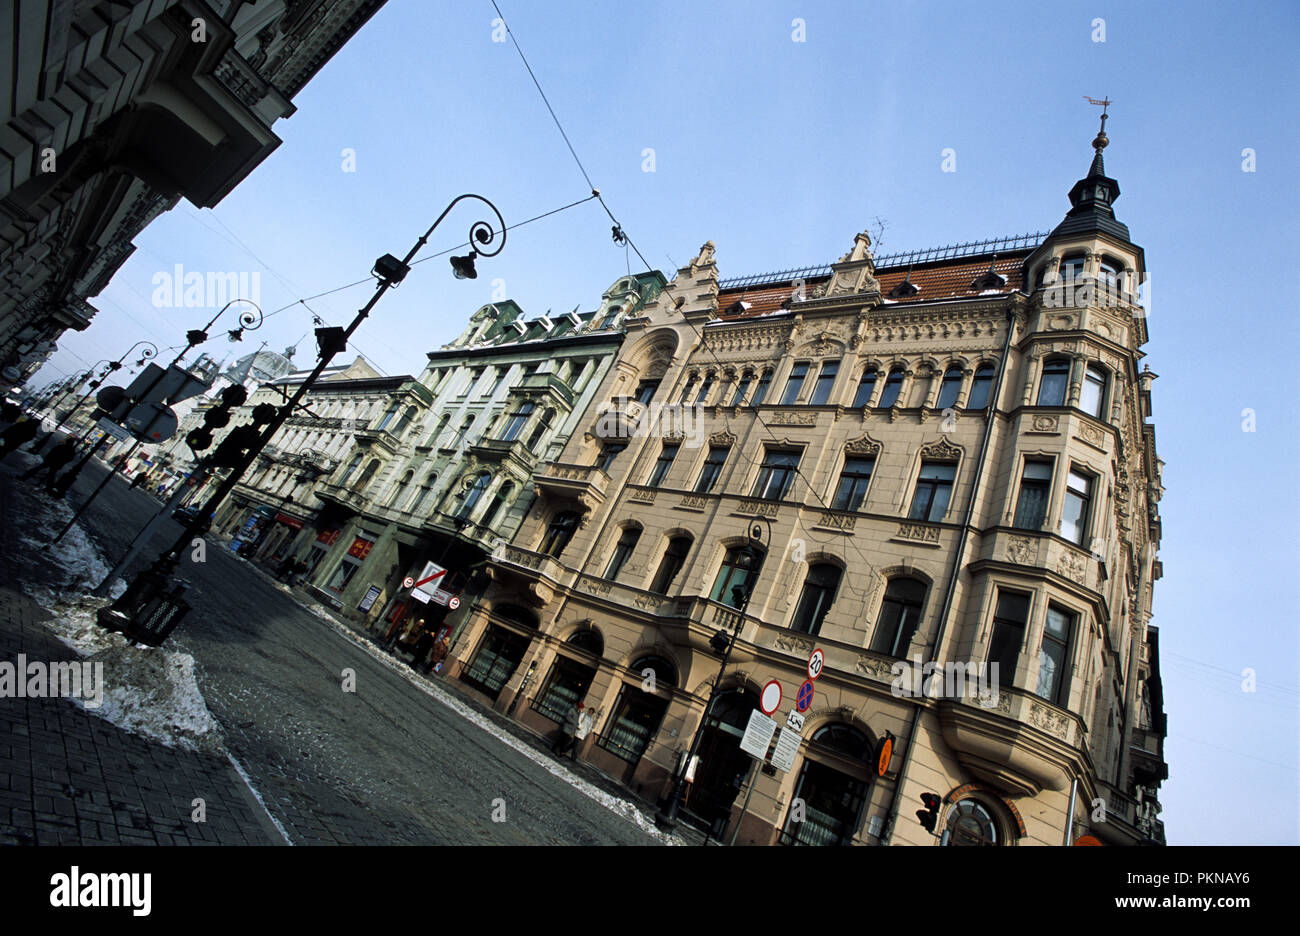 The famous Piotrowska Street in central Lodz Poland, the building on the right houses a cafe and restuarant on the lower floor 2007 Stock Photo